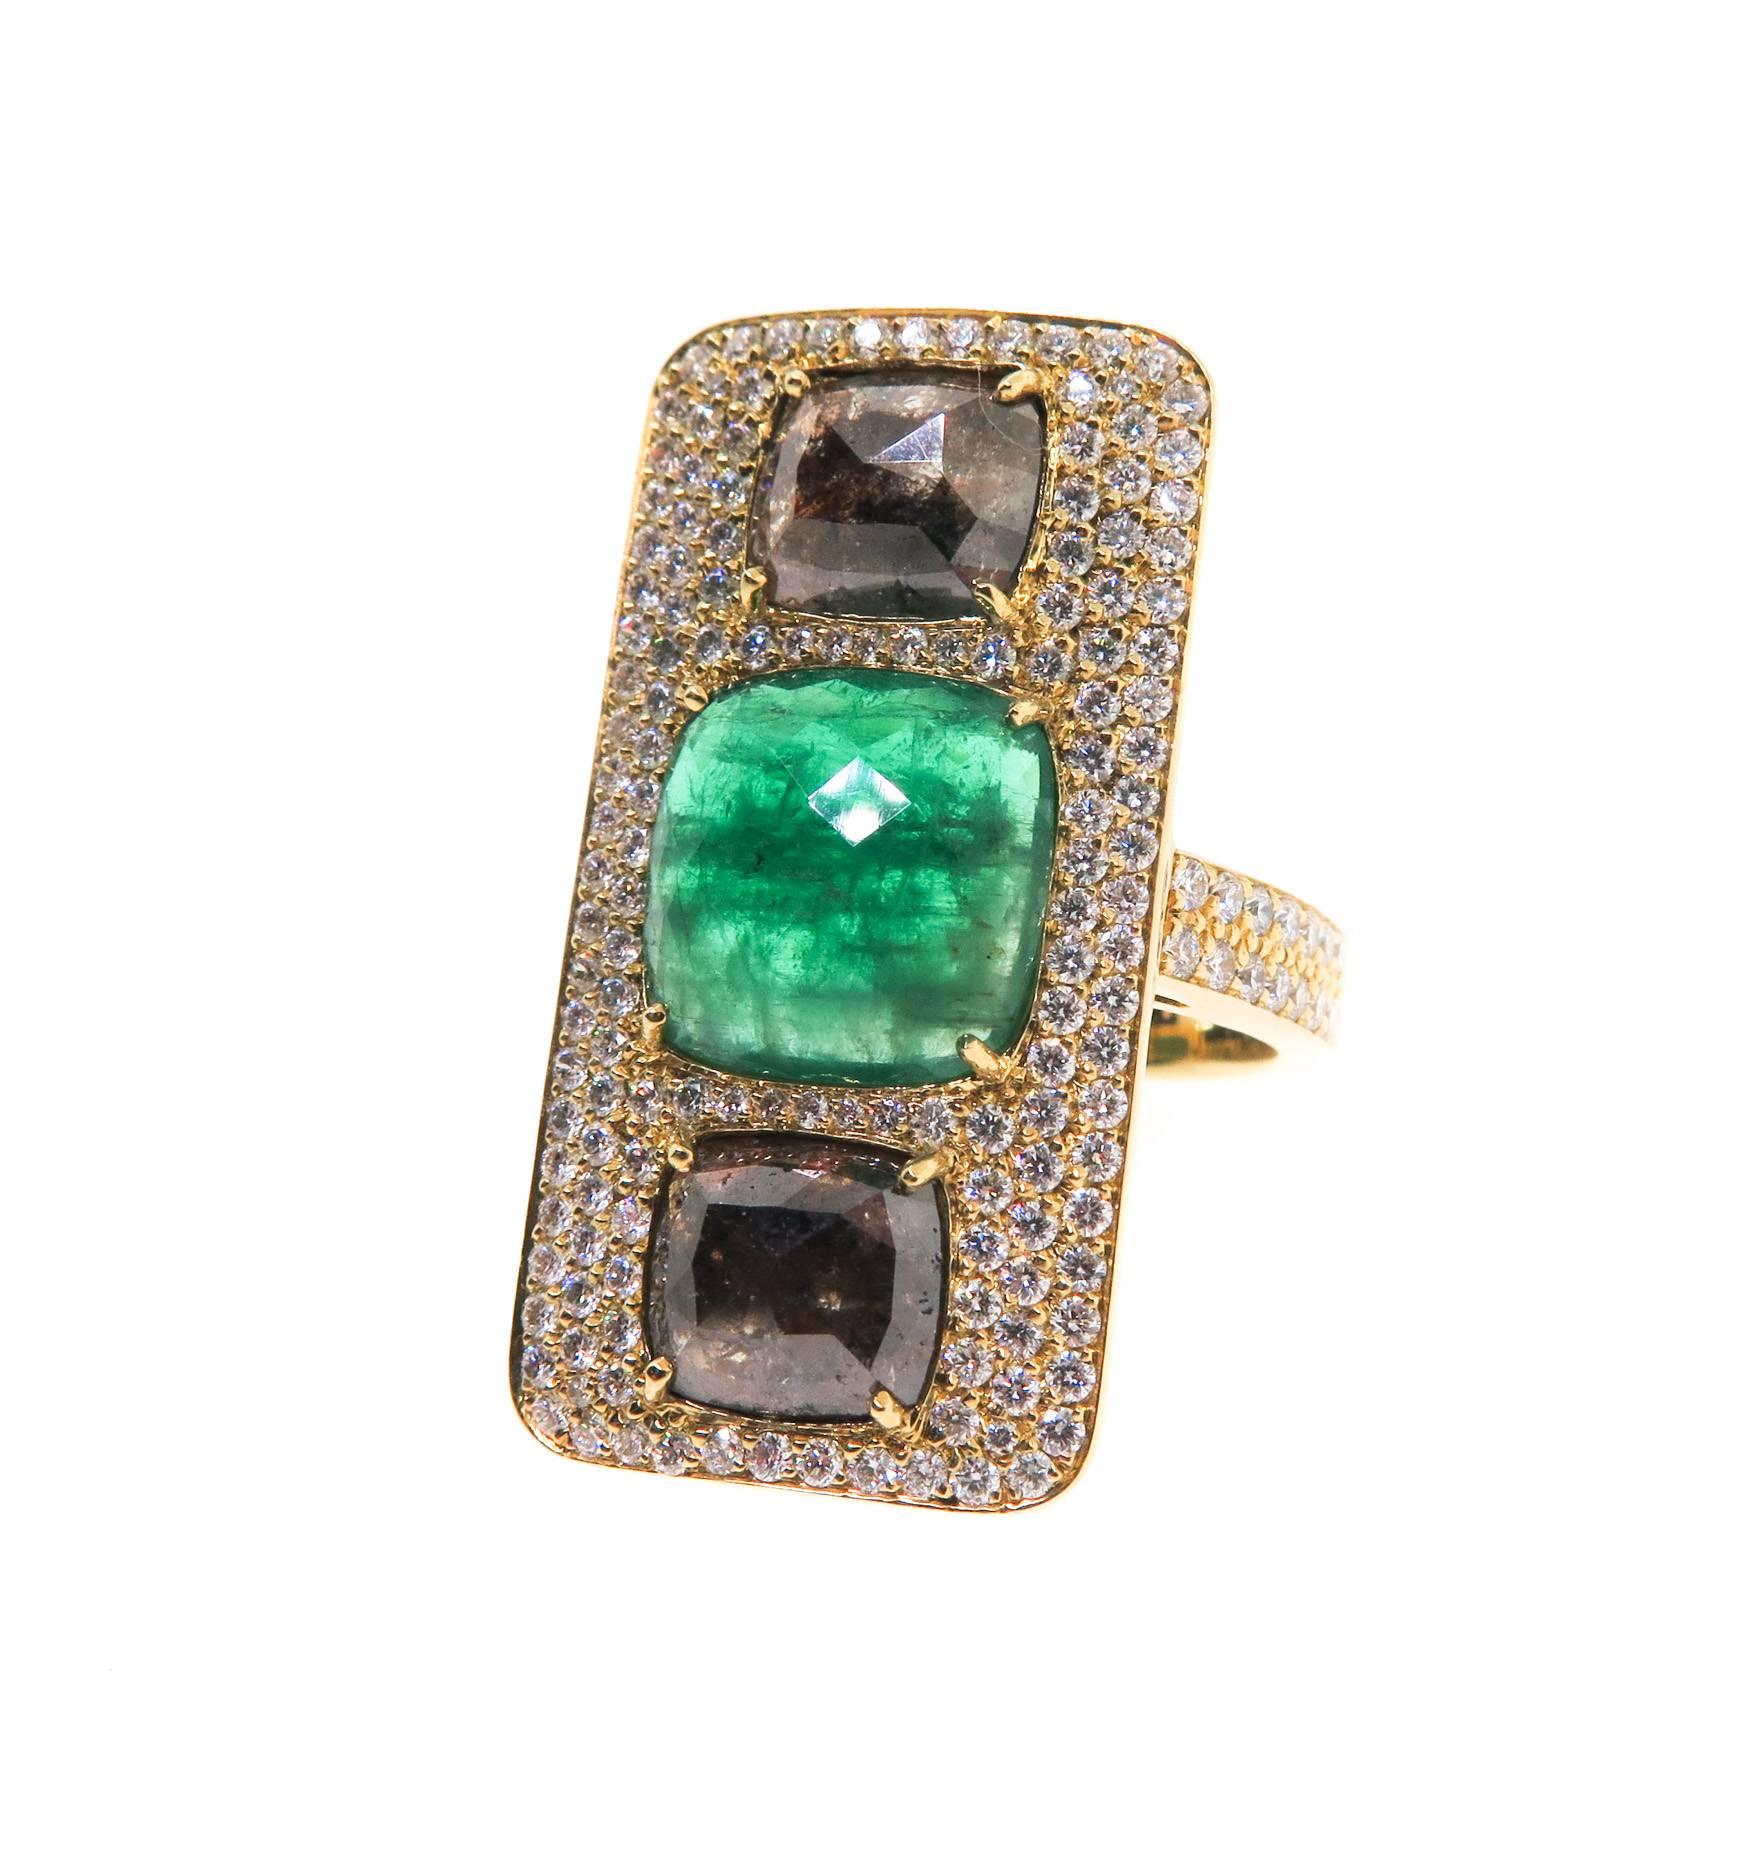 This incredible one of a kind ring is set with a vibrant green emerald in the center and natural colored diamonds at each end, framed by 1.48 carats of white diamond pave, set in 18K yellow gold. Finger size 7.5
The emerald is a medium dark green